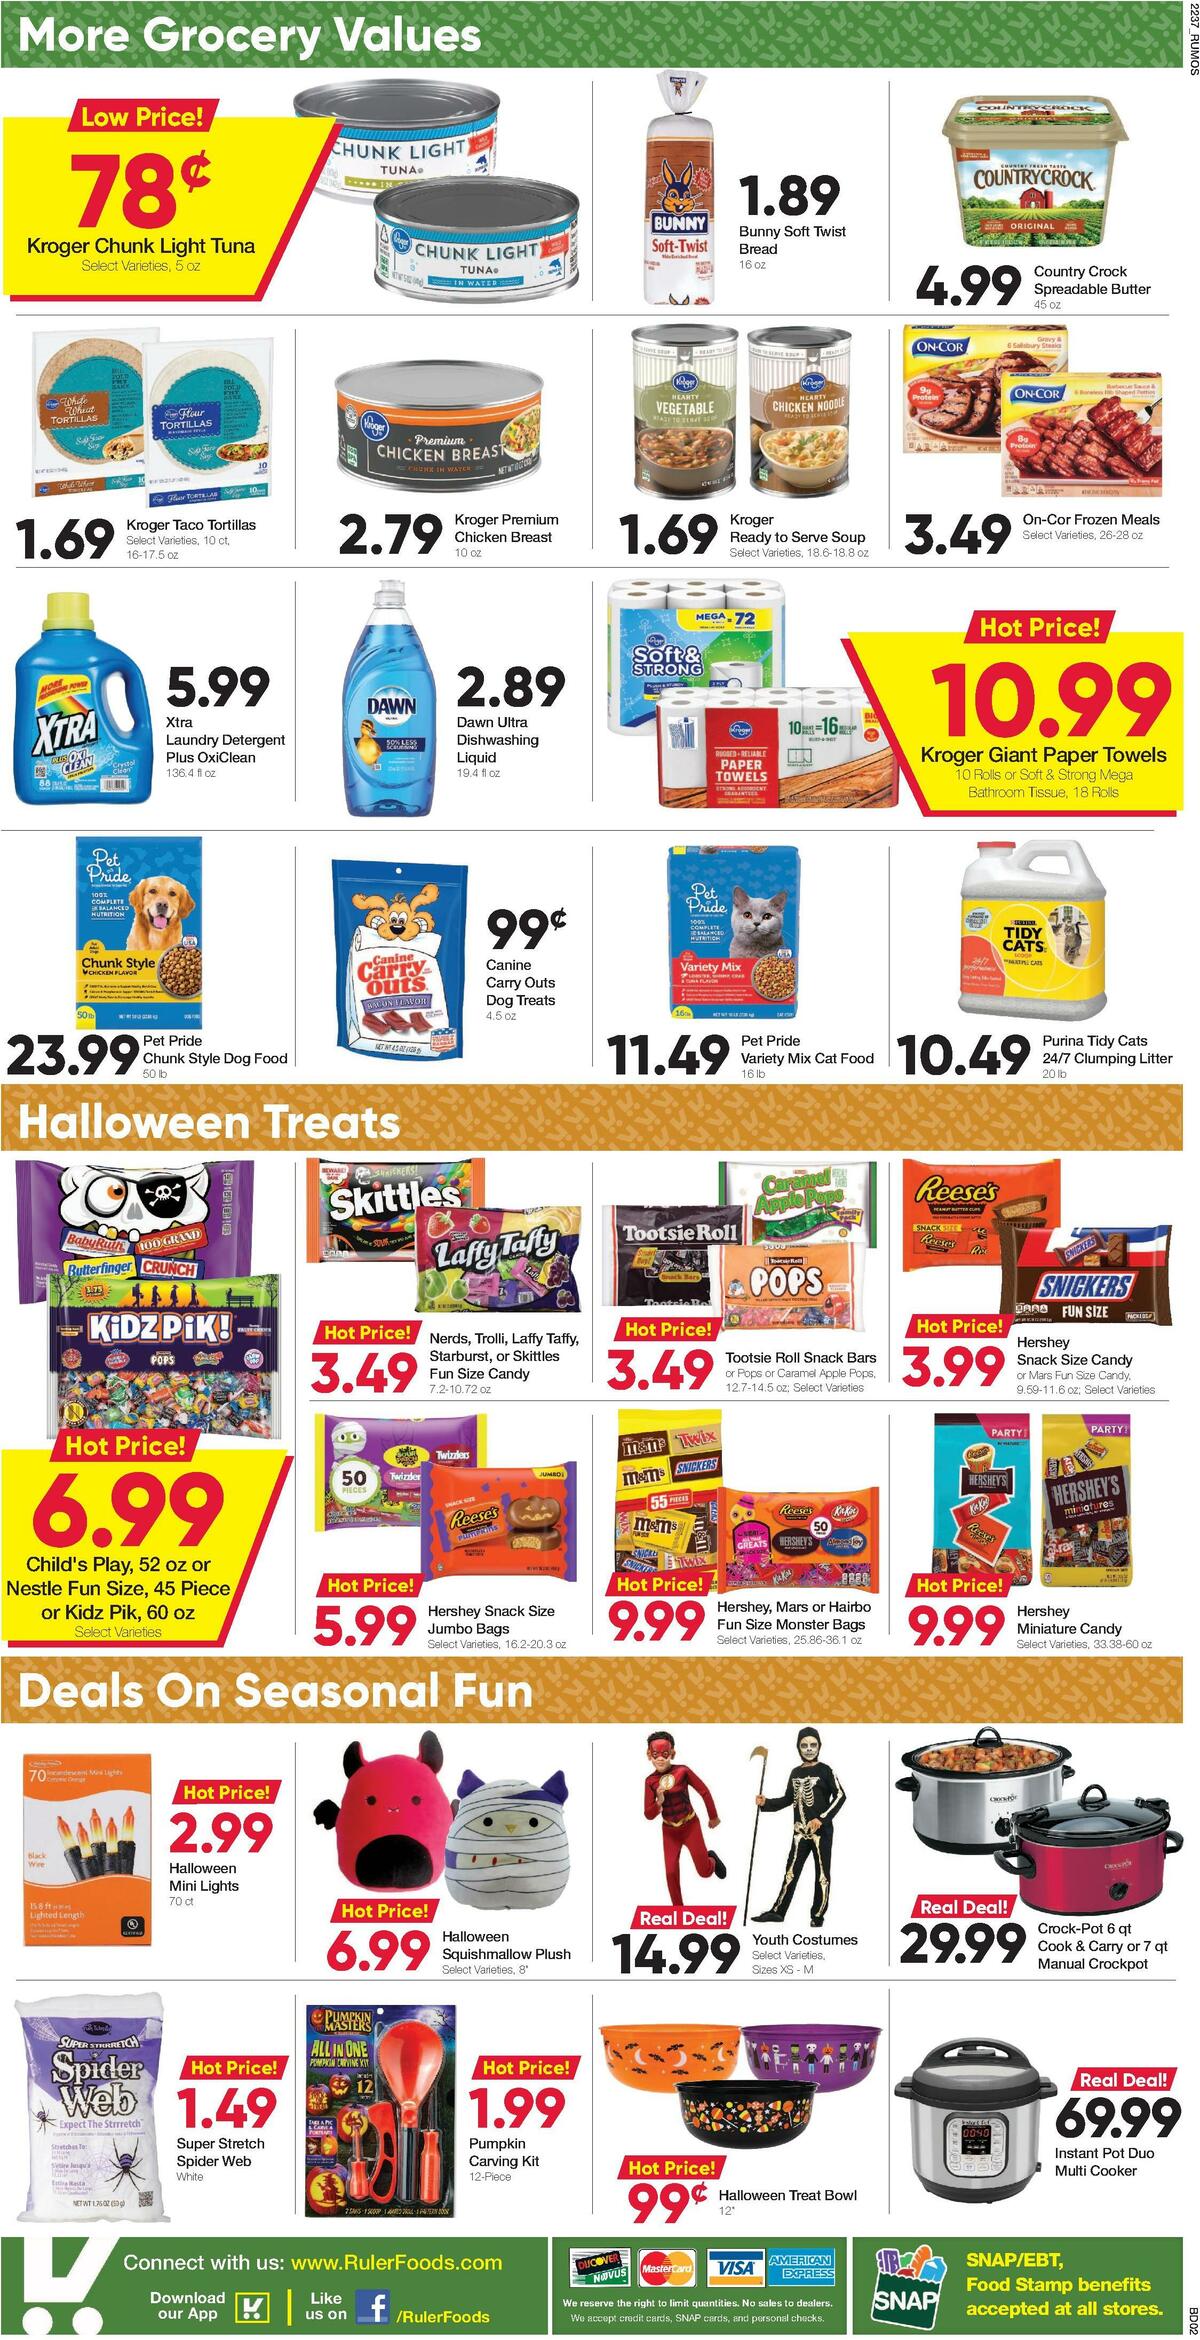 Ruler Foods Weekly Ad from October 12